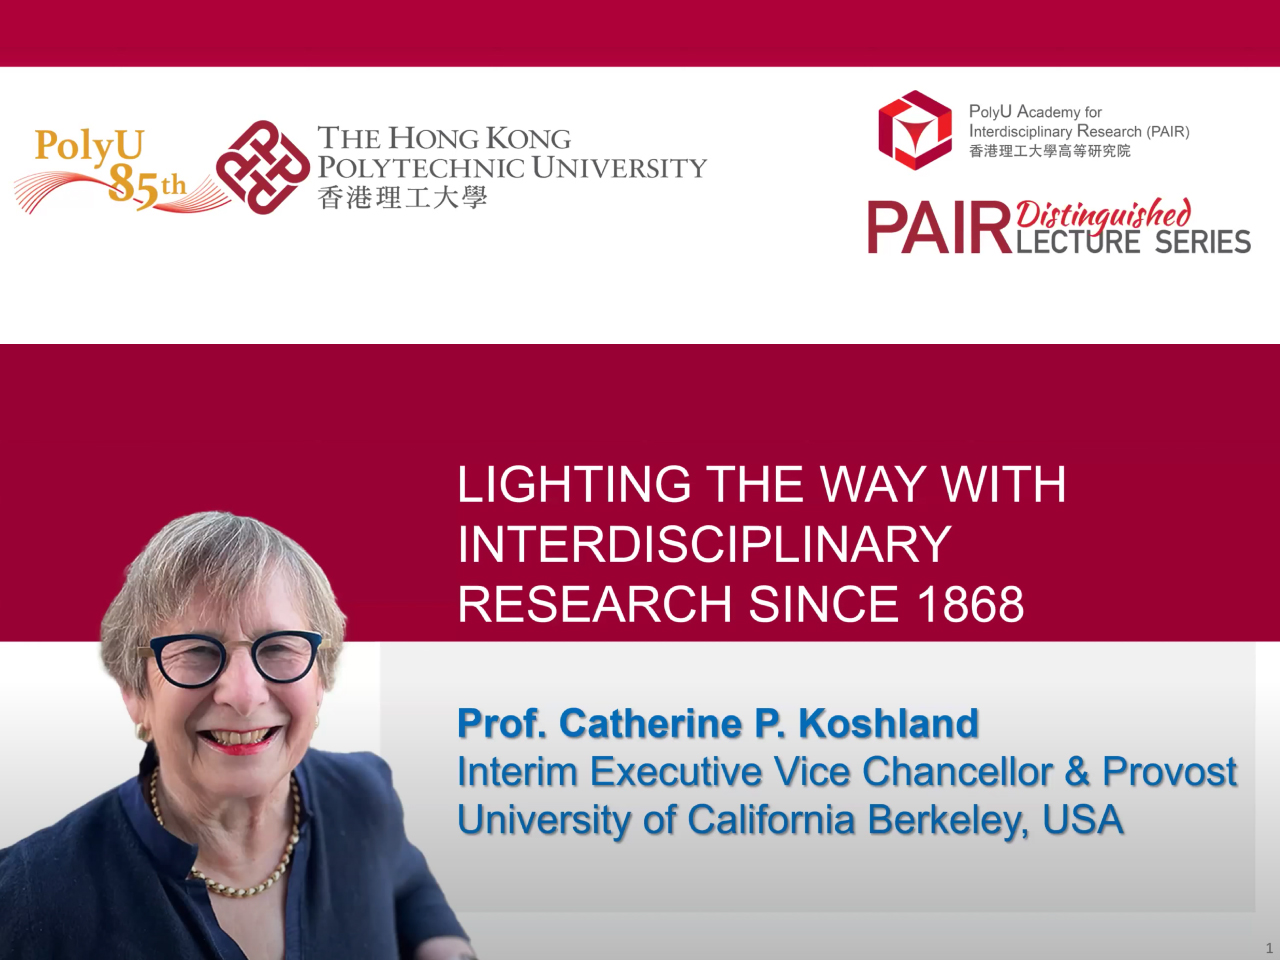 PAIR distinguished lecture series 1 : lighting the way with interdisciplinary research since 1868 